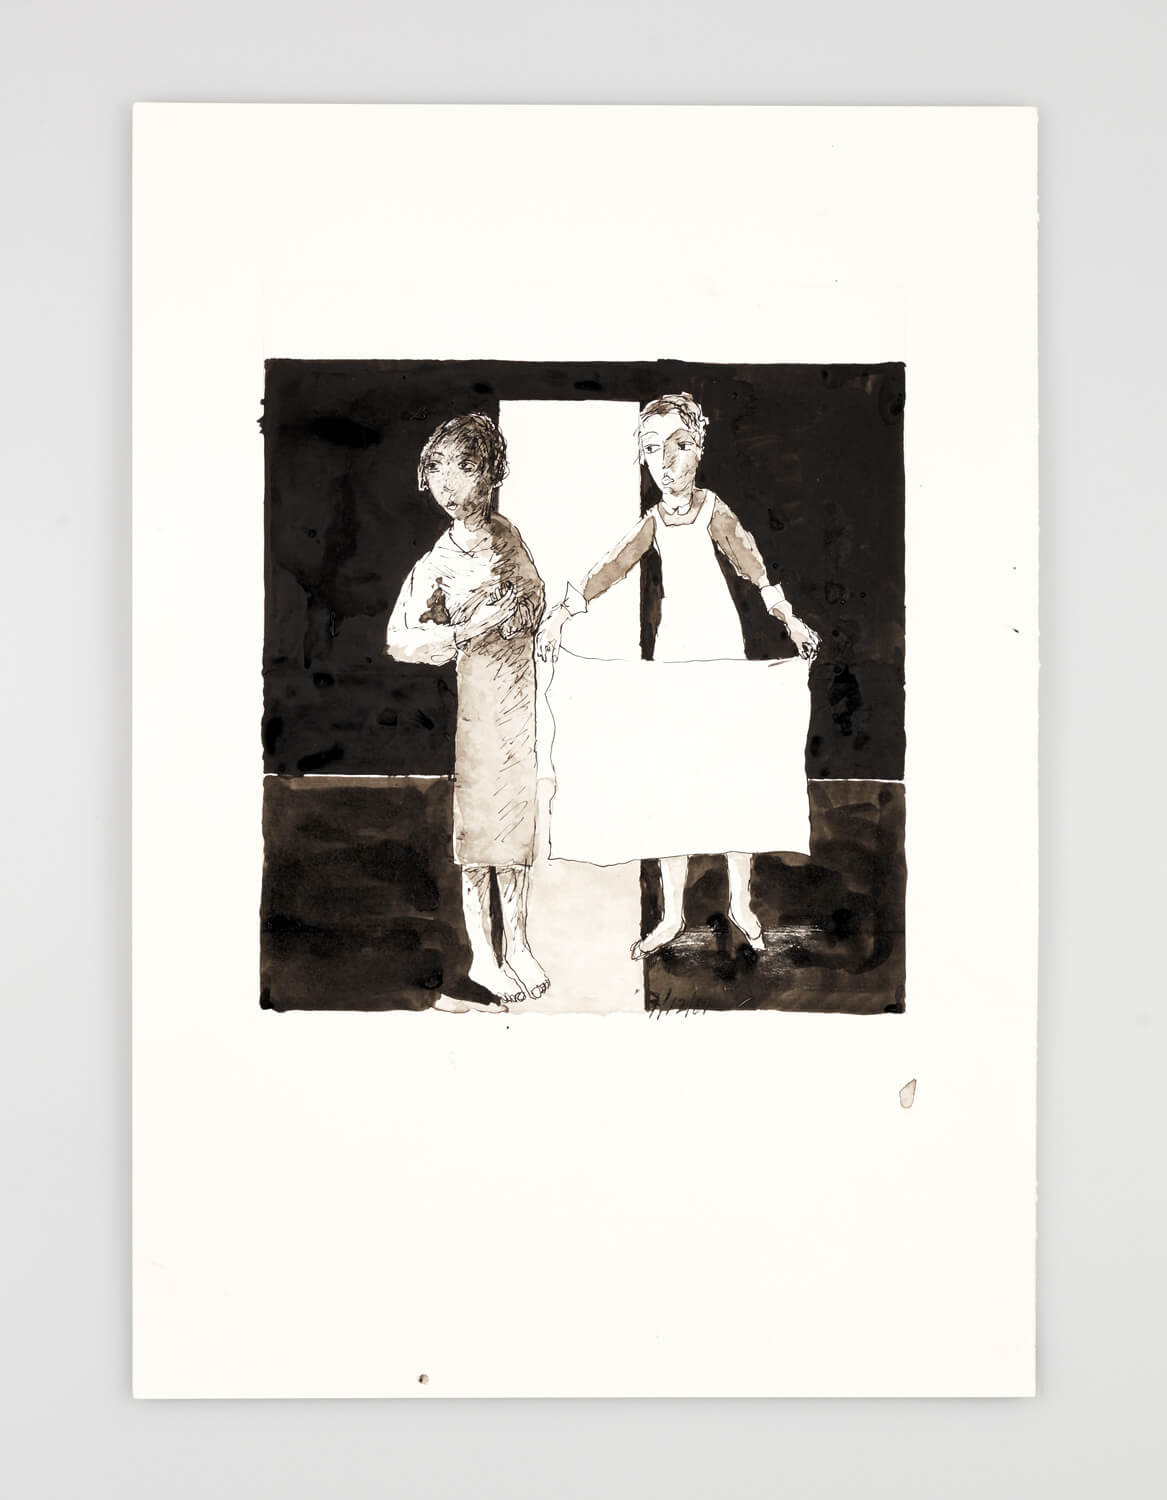 JB043 - Two Women - Being dressed - 2001 - 50 x 35 cm - Indian ink and wash on paper